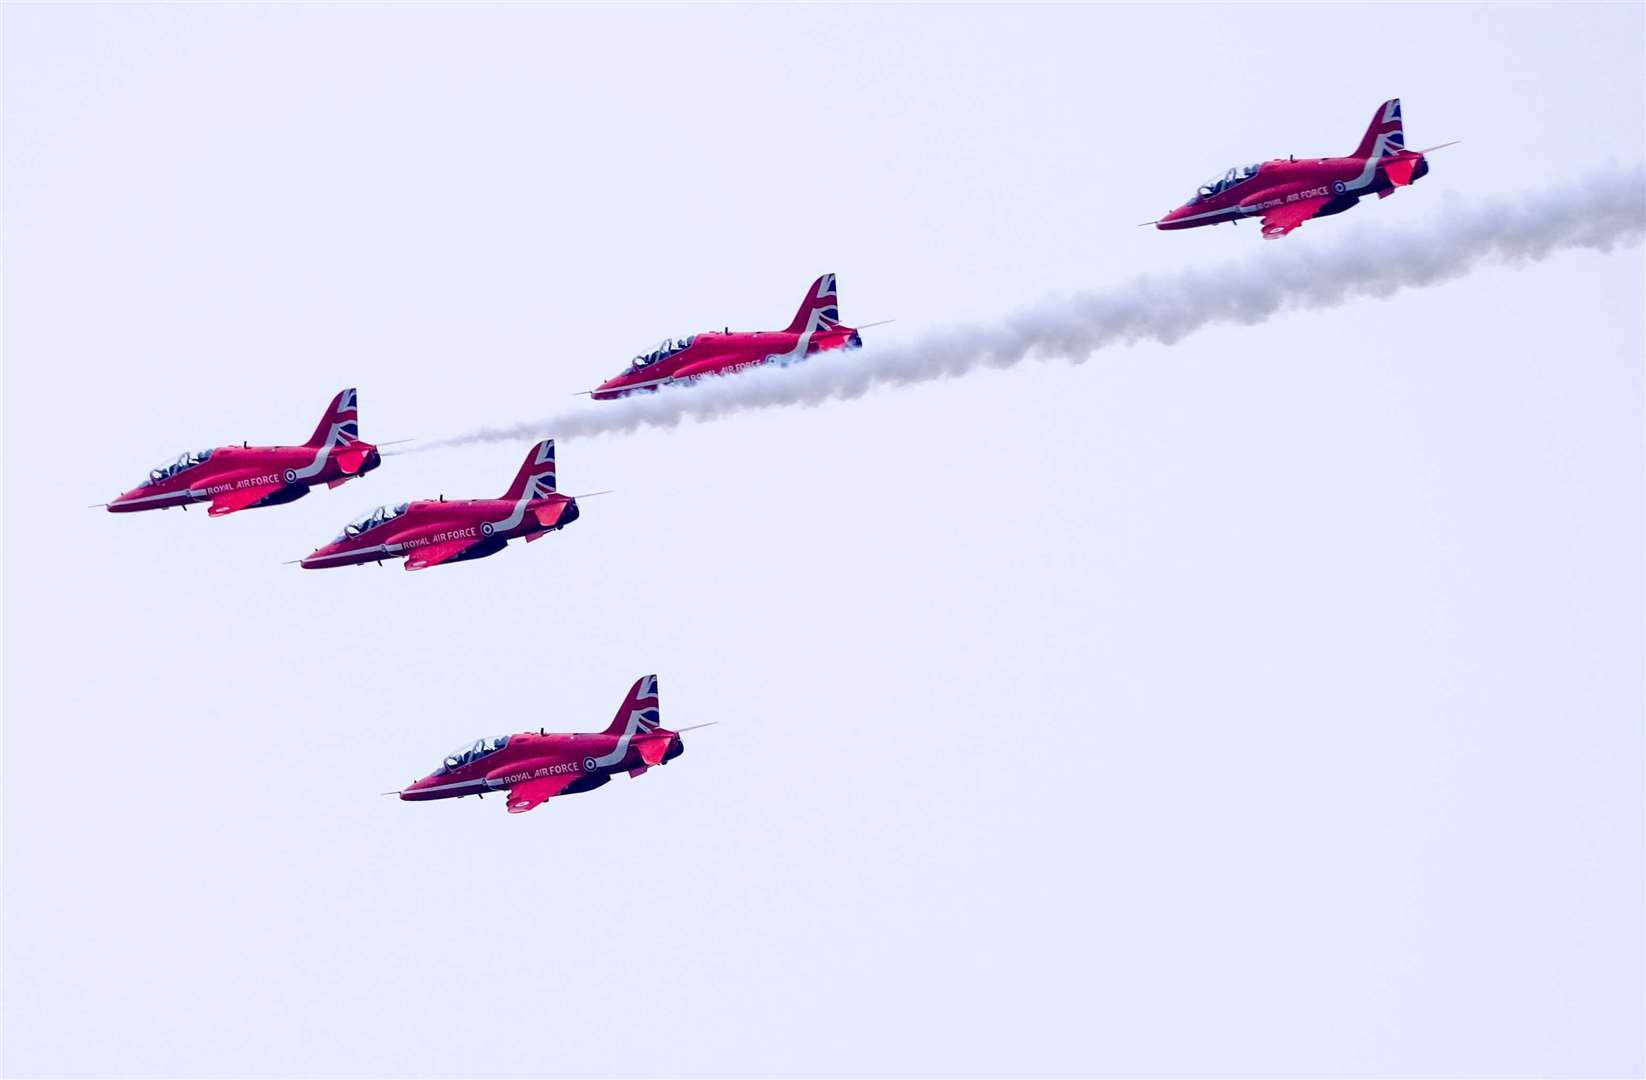 The Red Arrows display was cancelled due to poor weather conditions